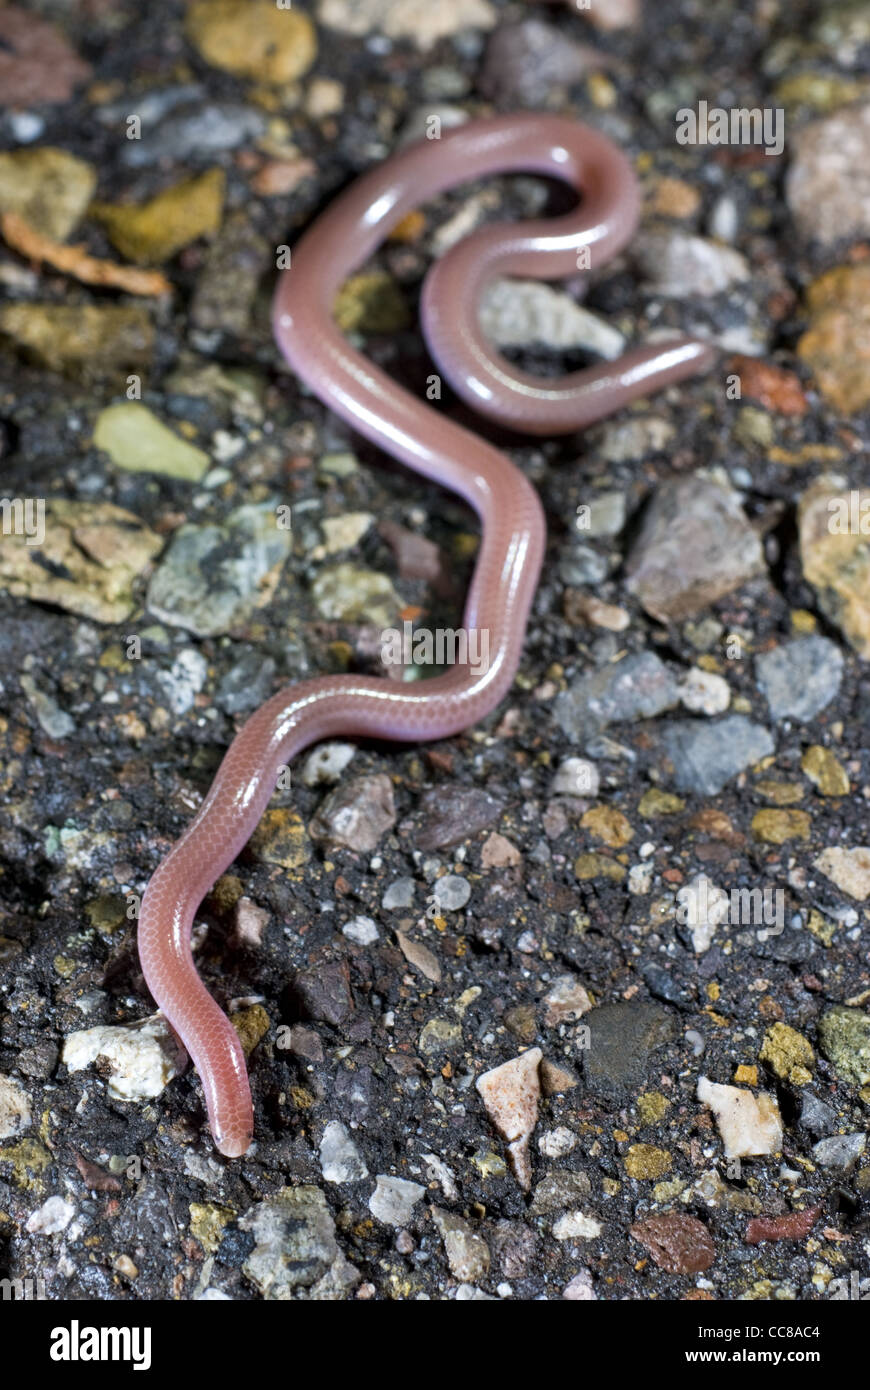 New Mexico Threadsnake, (Leptotyphlops dissectus), on paved road at night in Sierra county, New Mexico, USA. Stock Photo